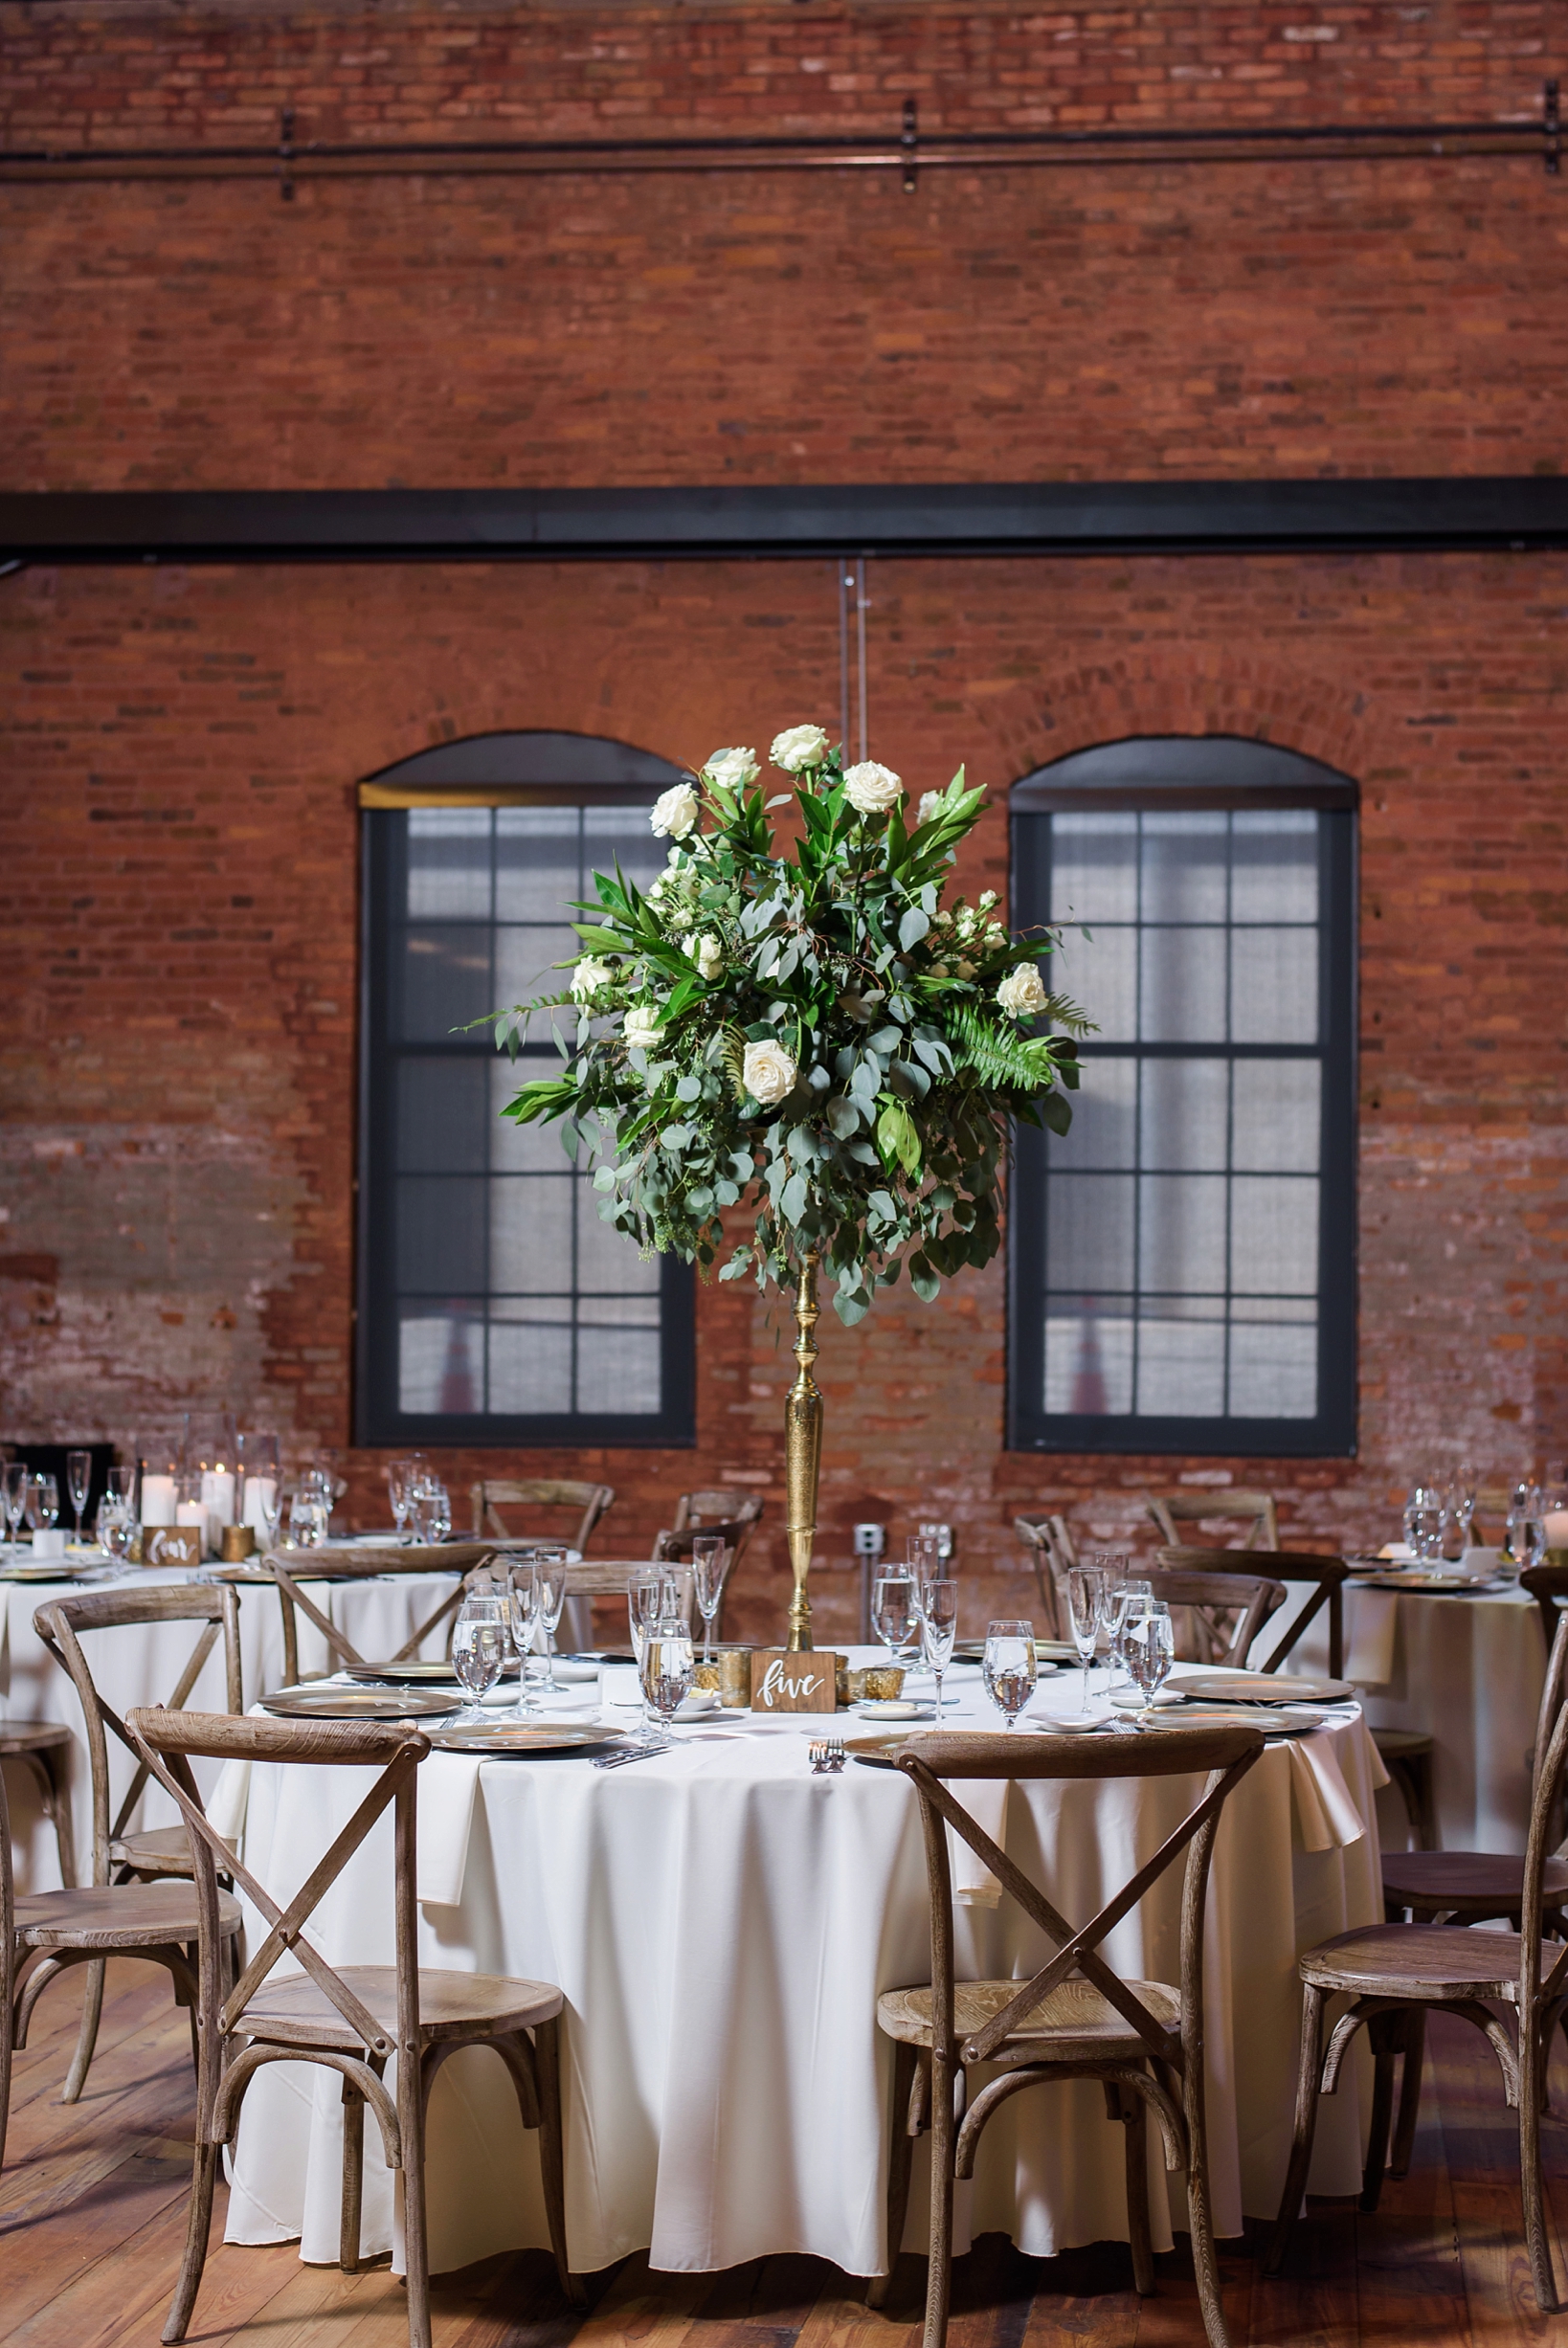 Wedding reception table with large floral centerpieces and rustic wooden chairs